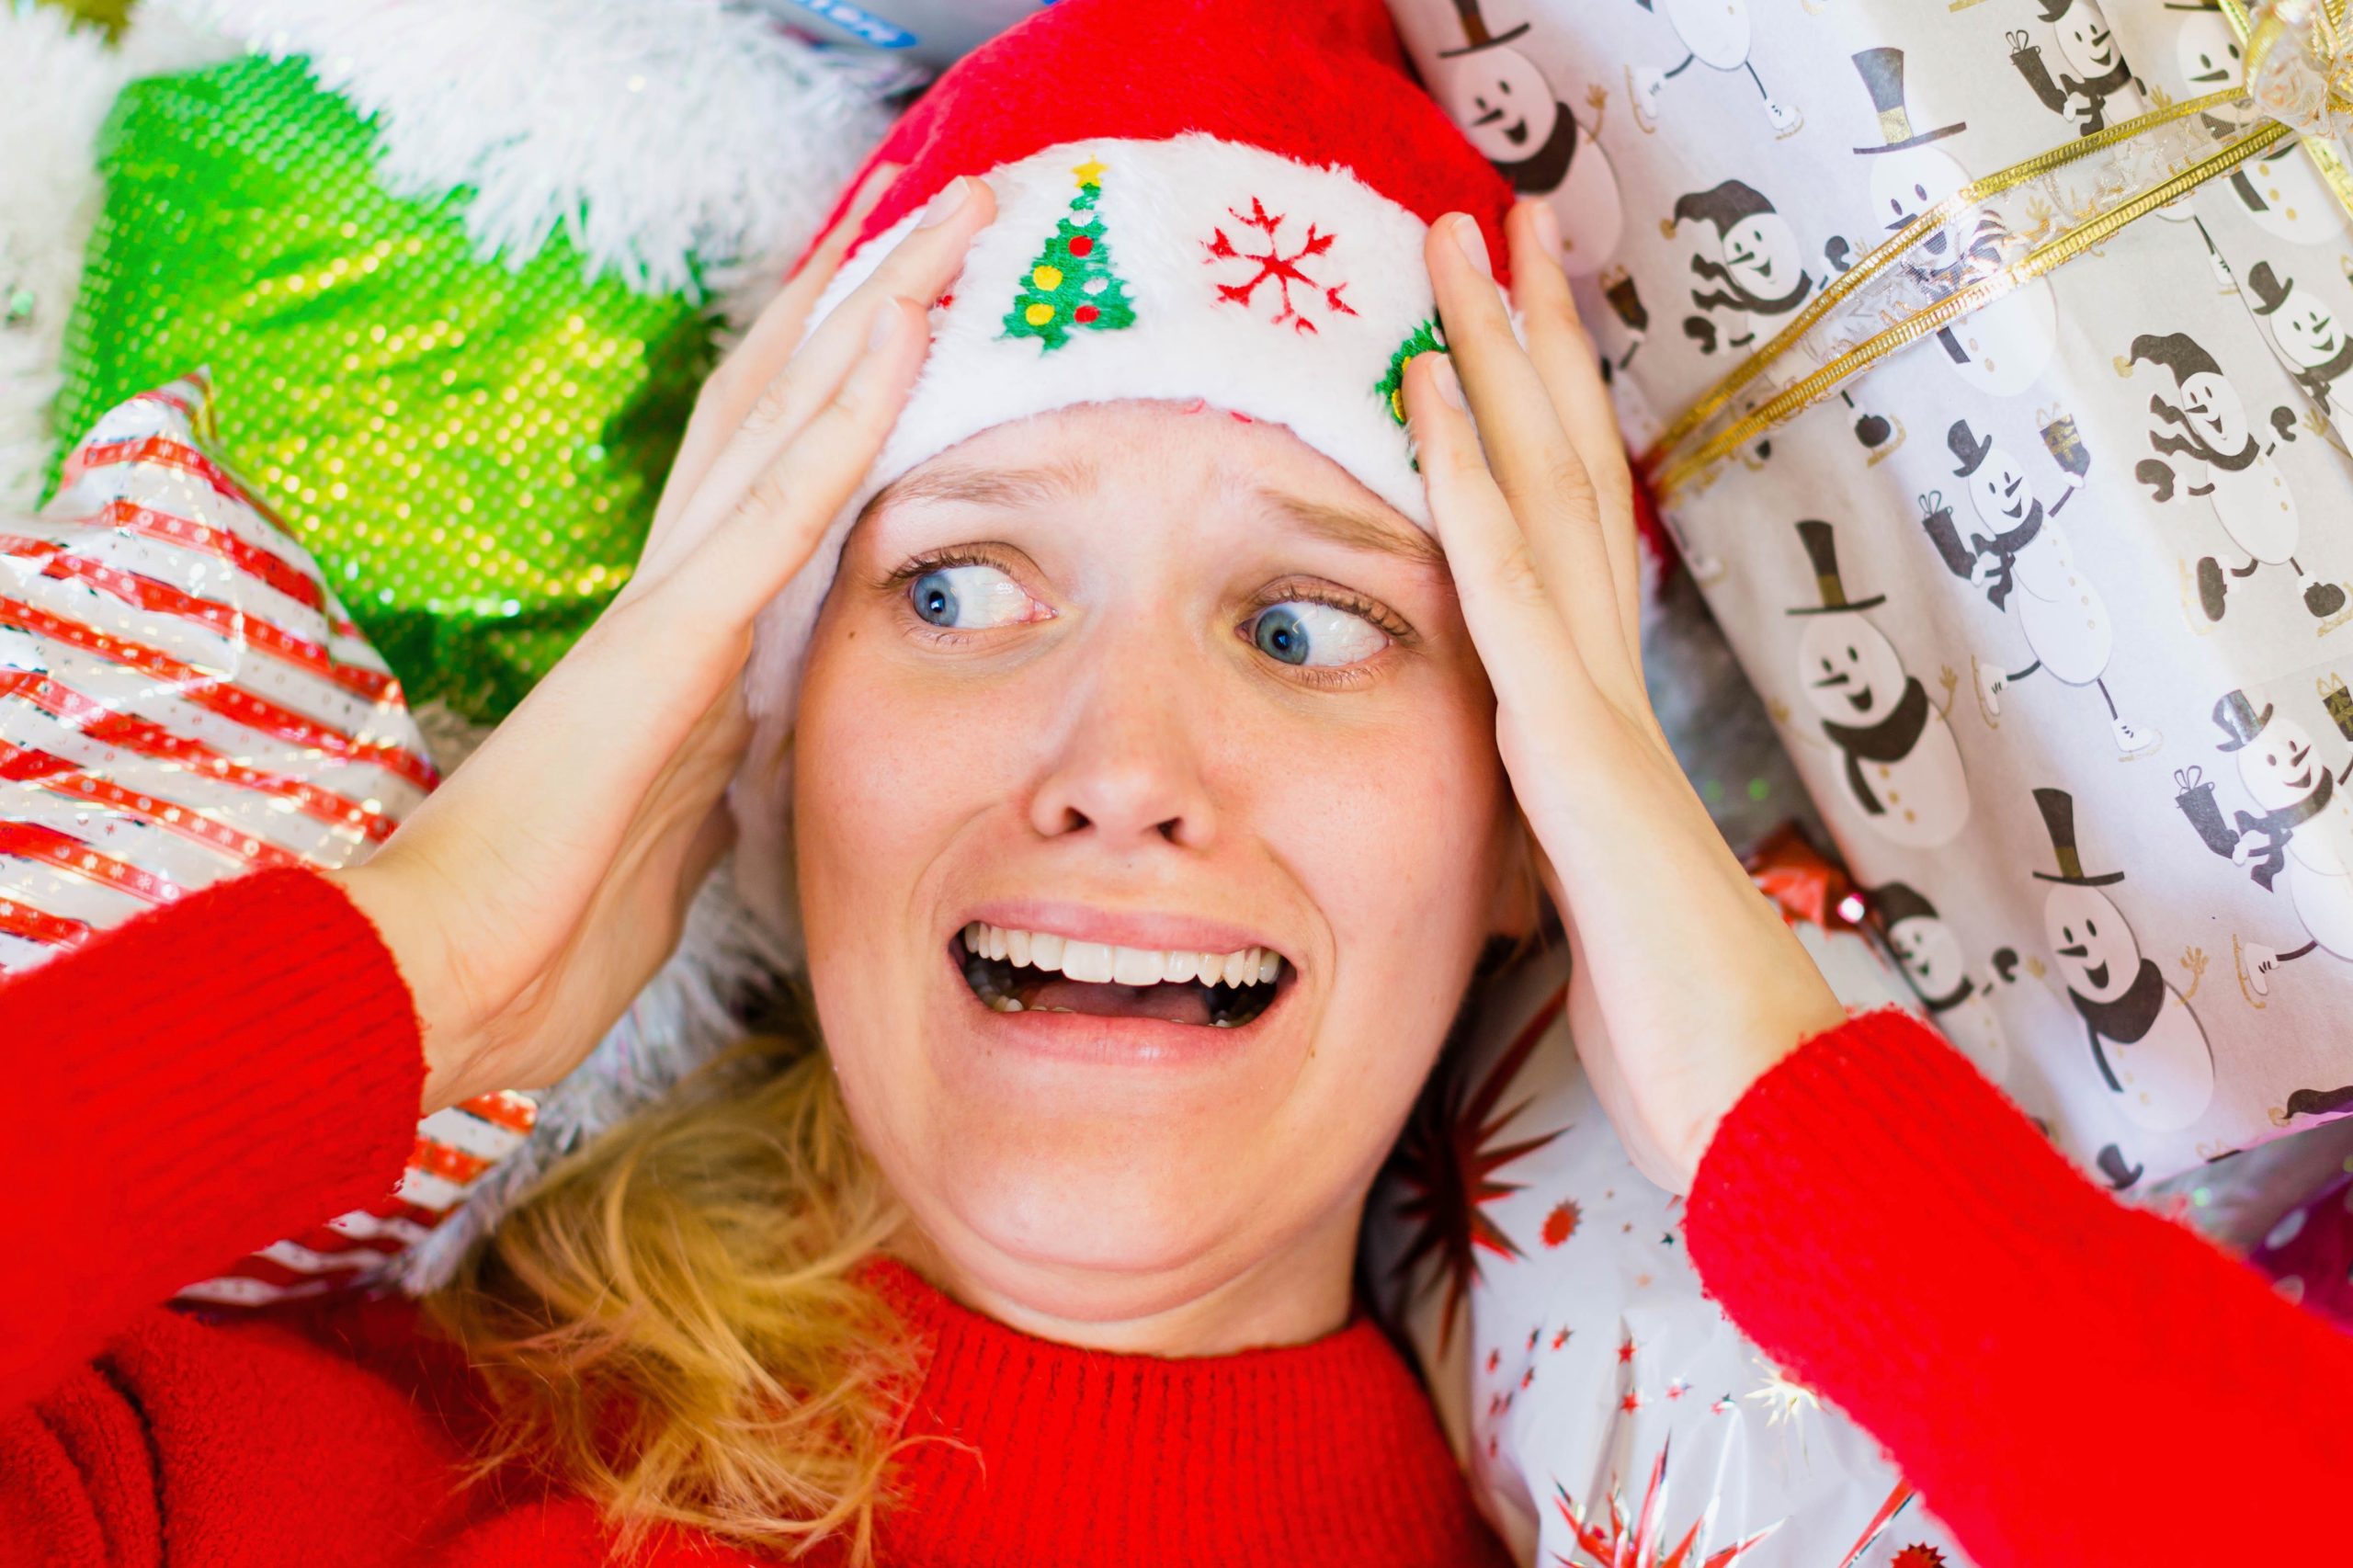 woman laying down in holiday clothes has frightened expression on her face